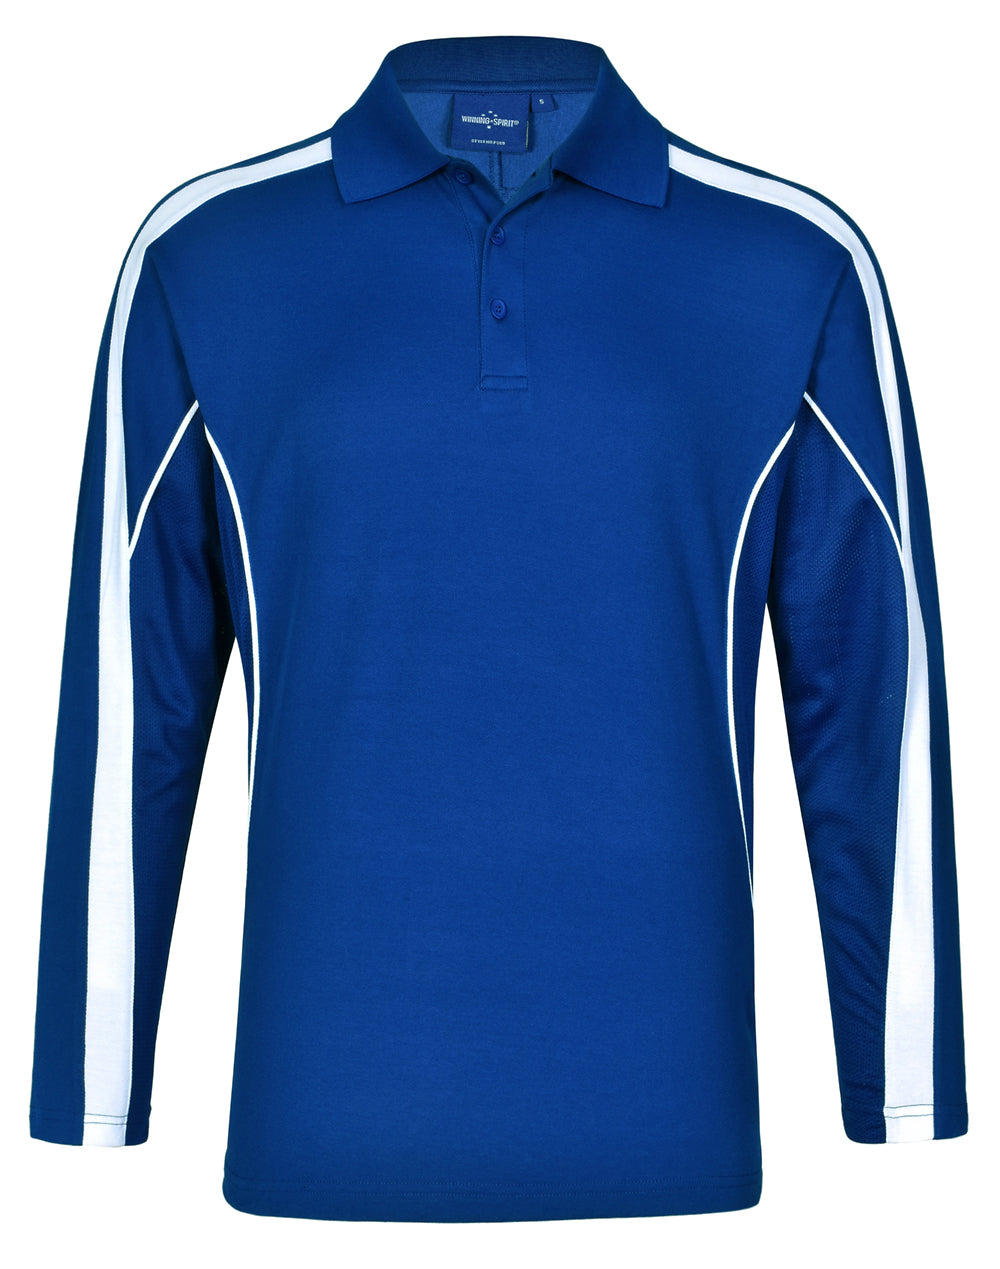 a blue polo shirt with white stripes on the sleeves